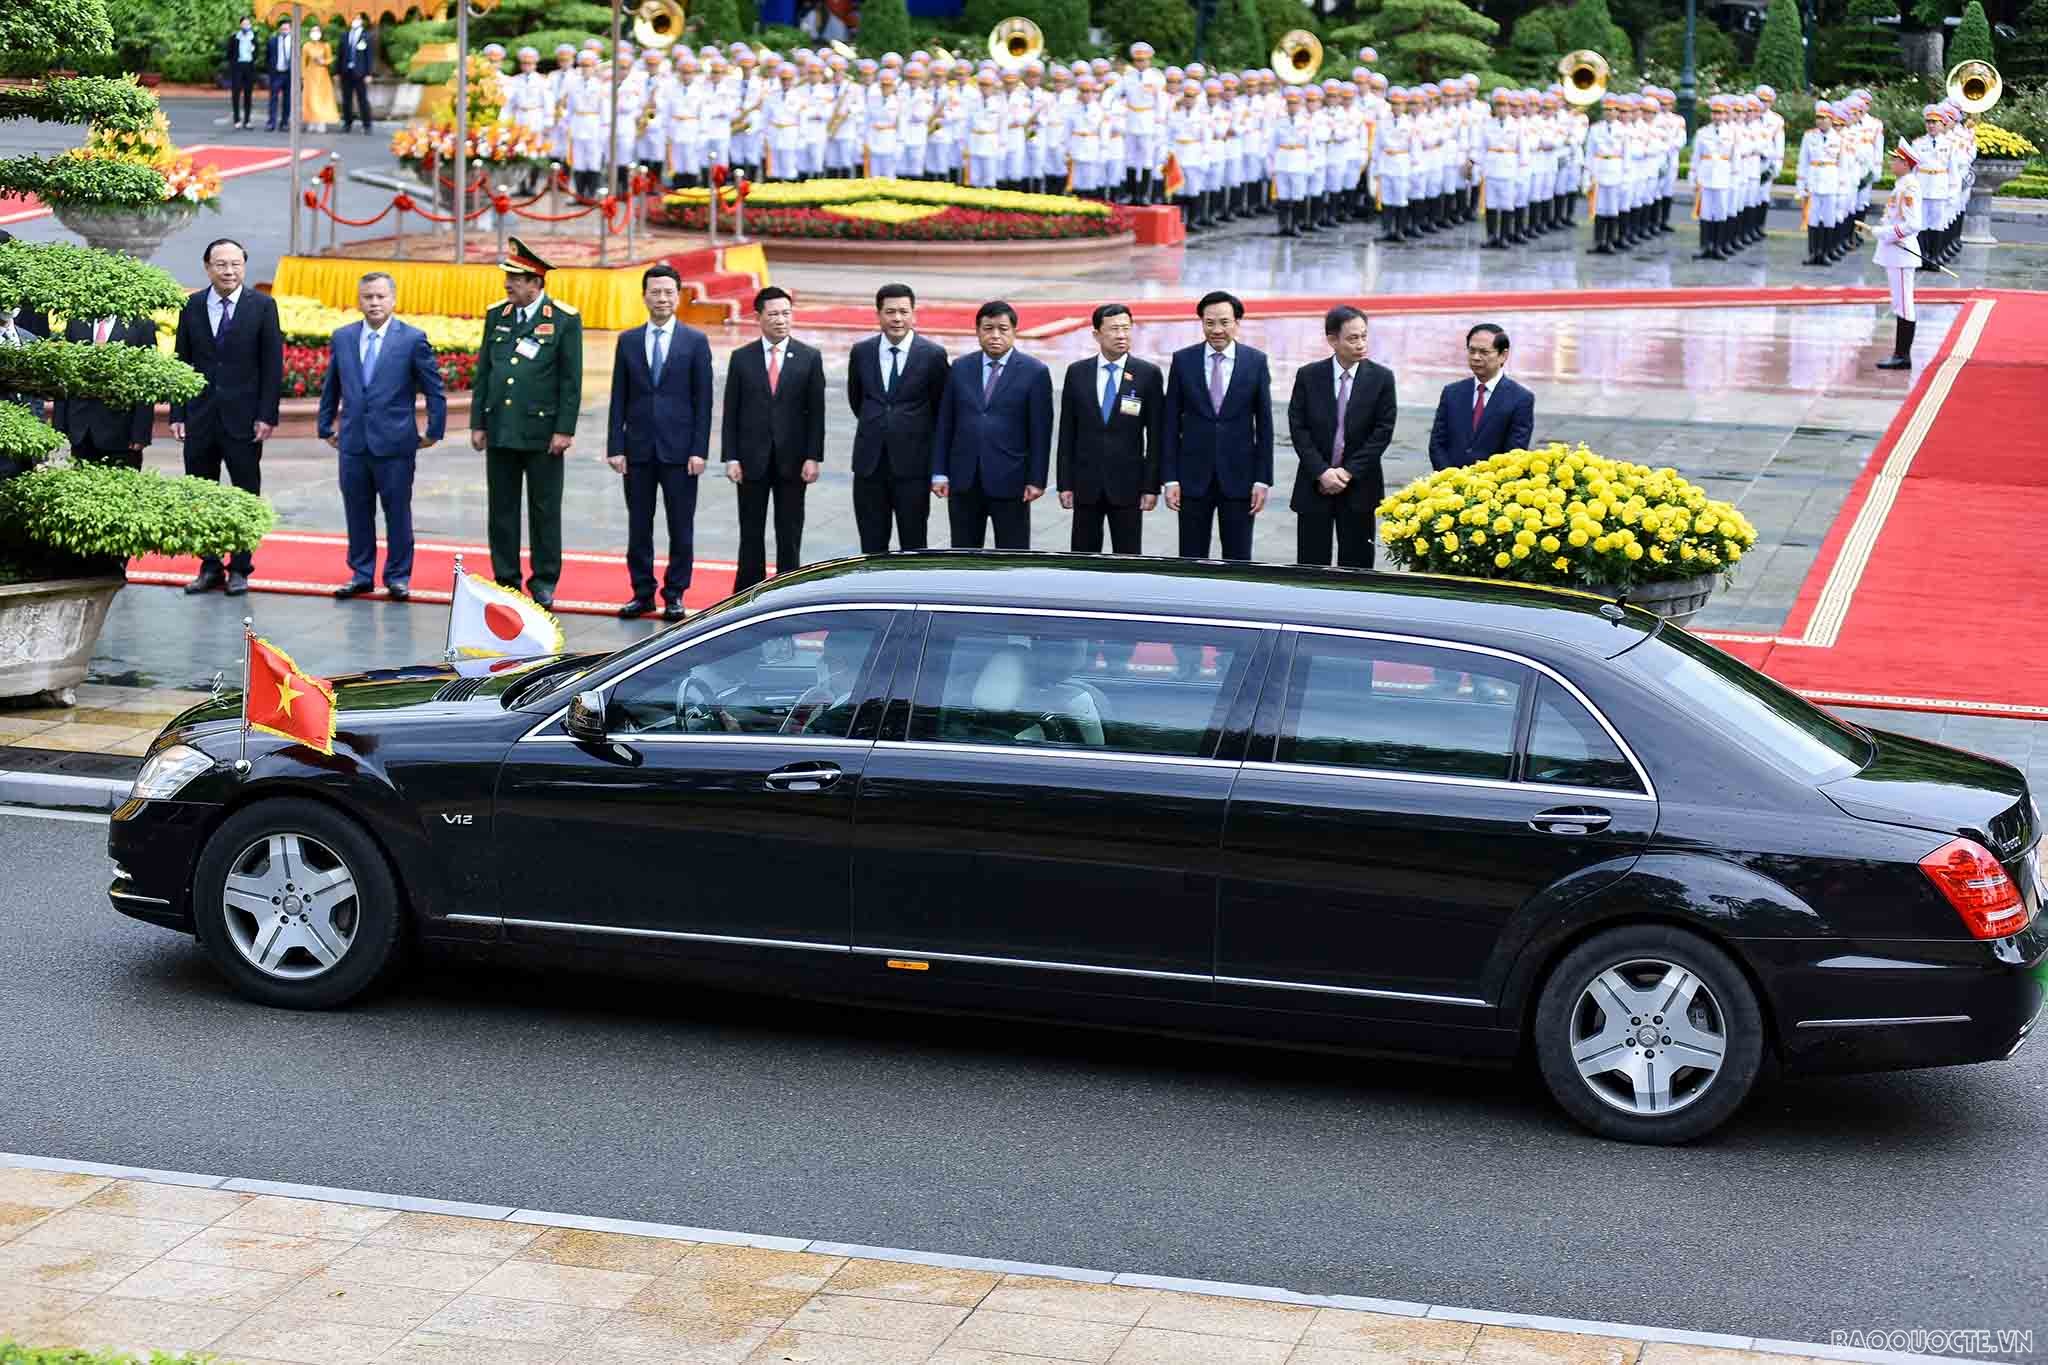 Official welcome ceremony for Japanese Prime Minister in Ha Noi